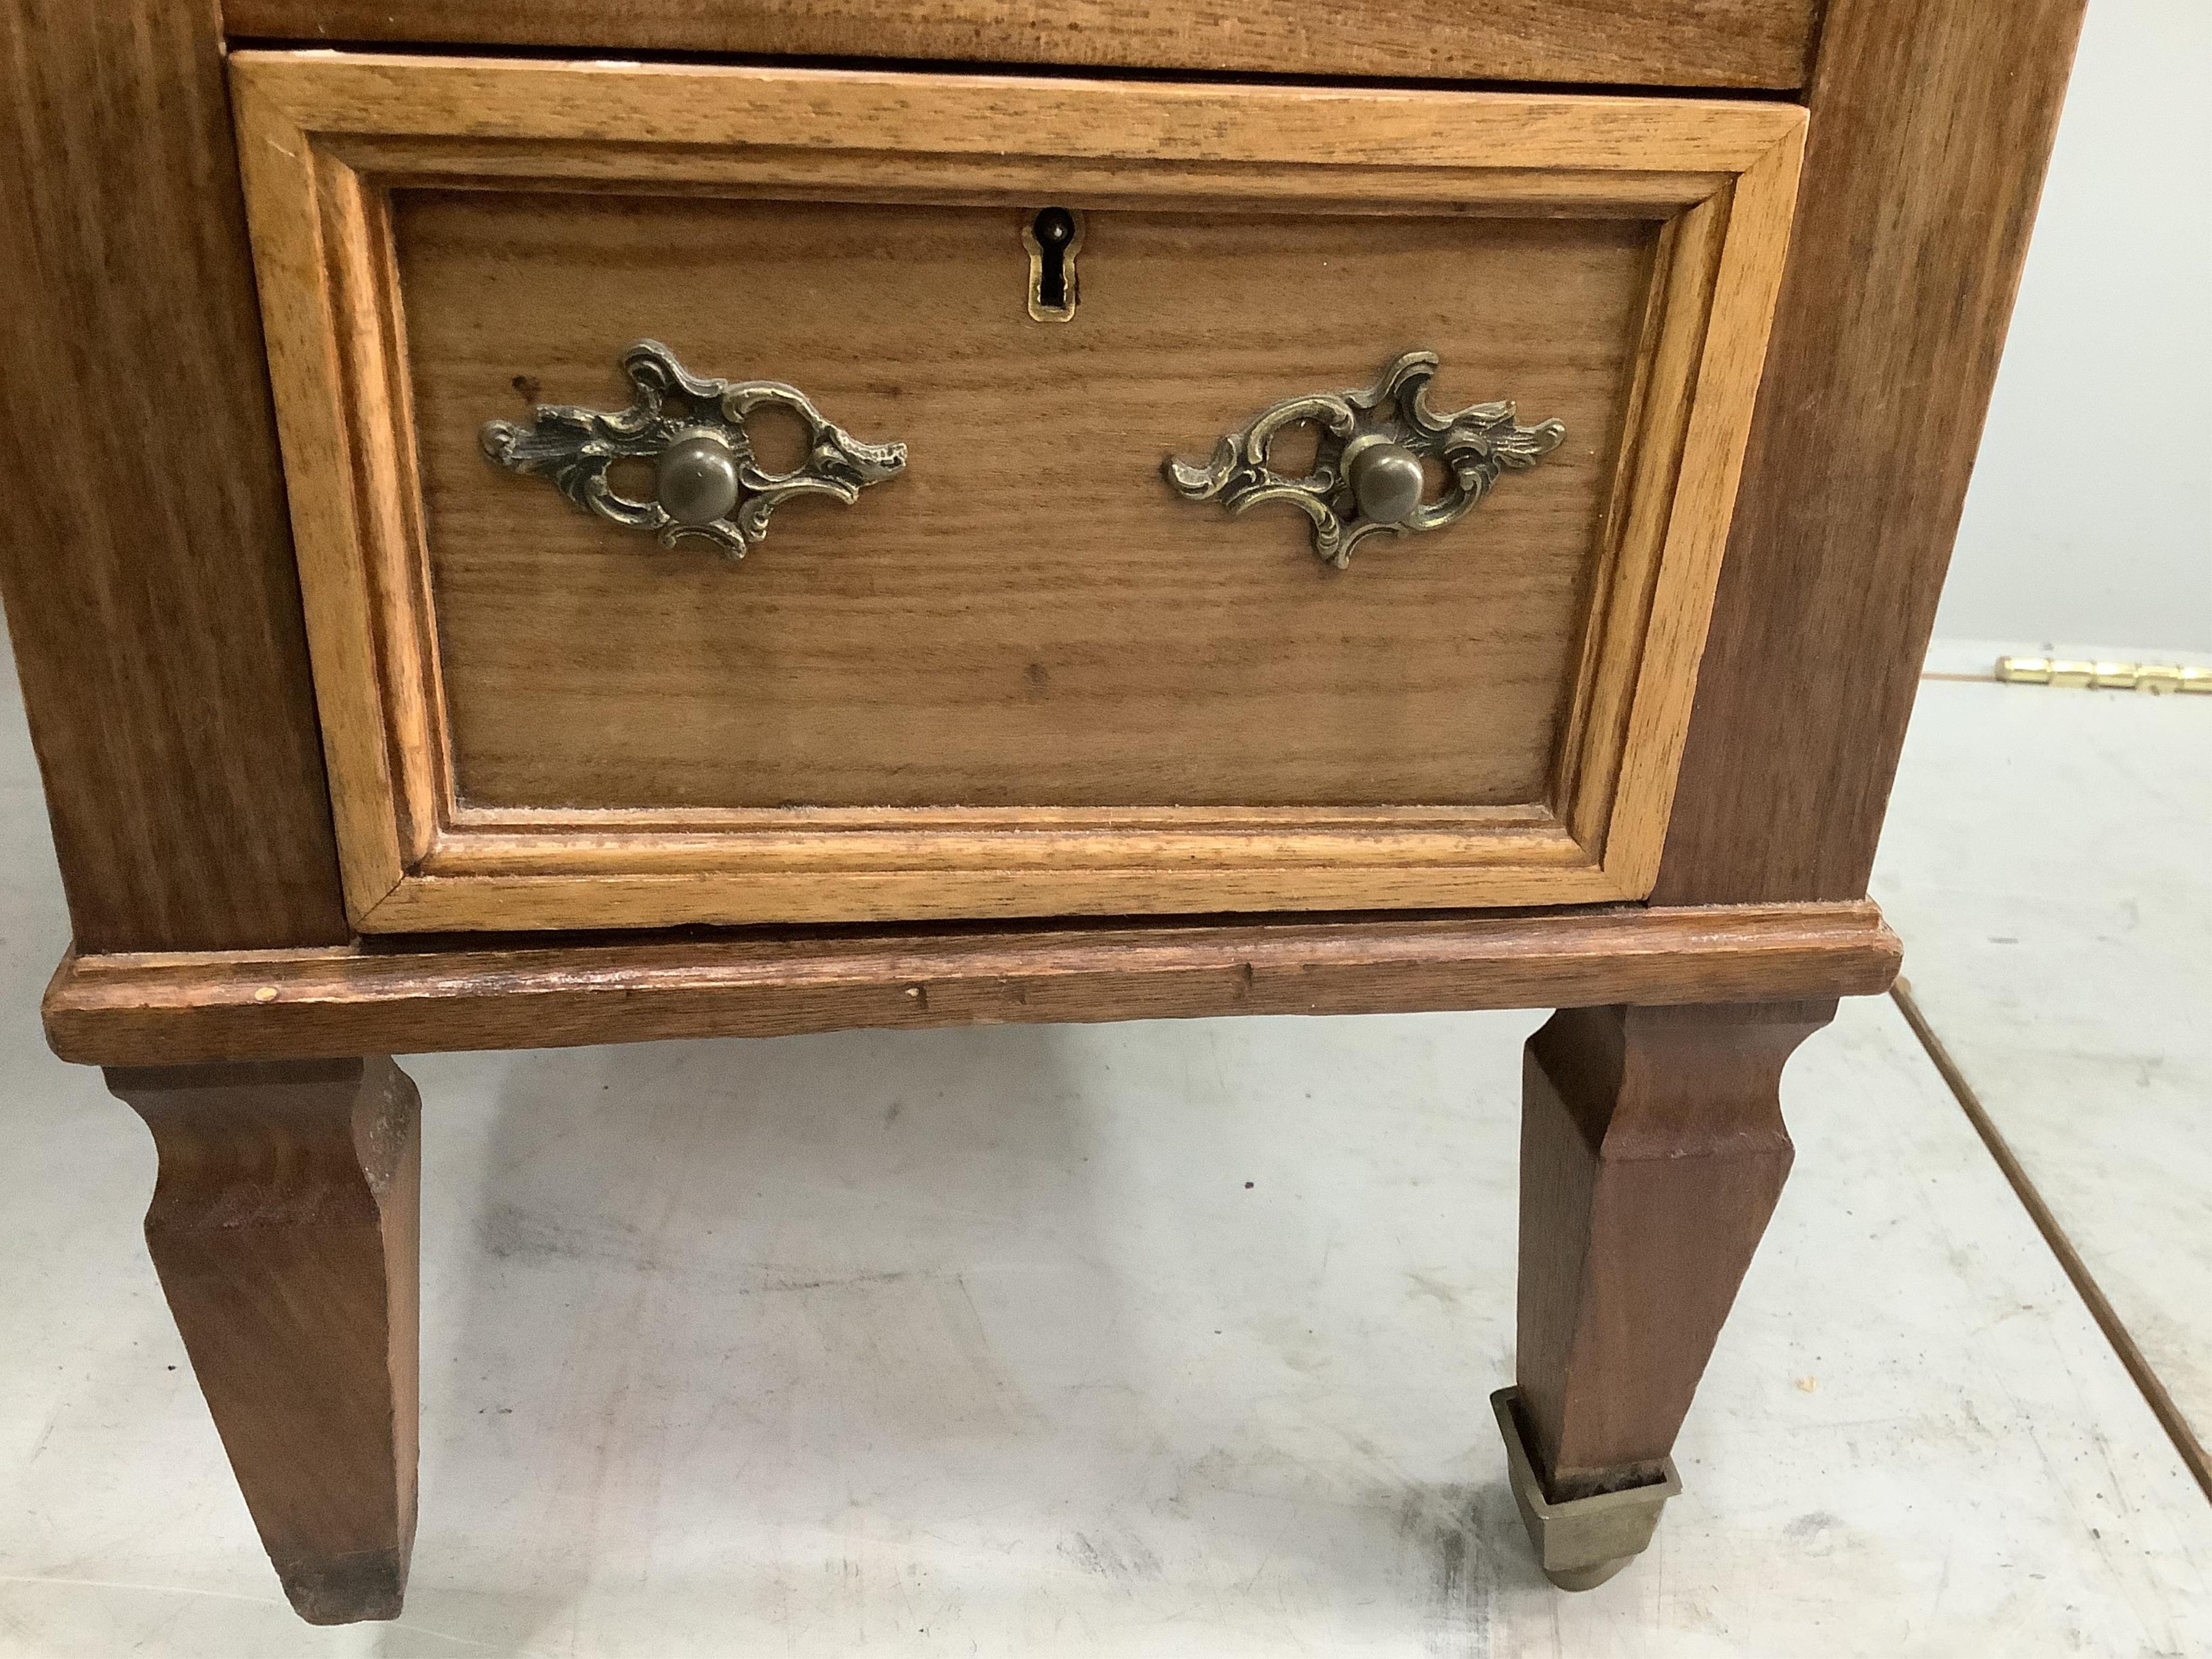 A late Victorian walnut nine drawer kneehole desk, missing two castors and one handle, width 112cm, depth 59cm, height 78cm. Condition - fair